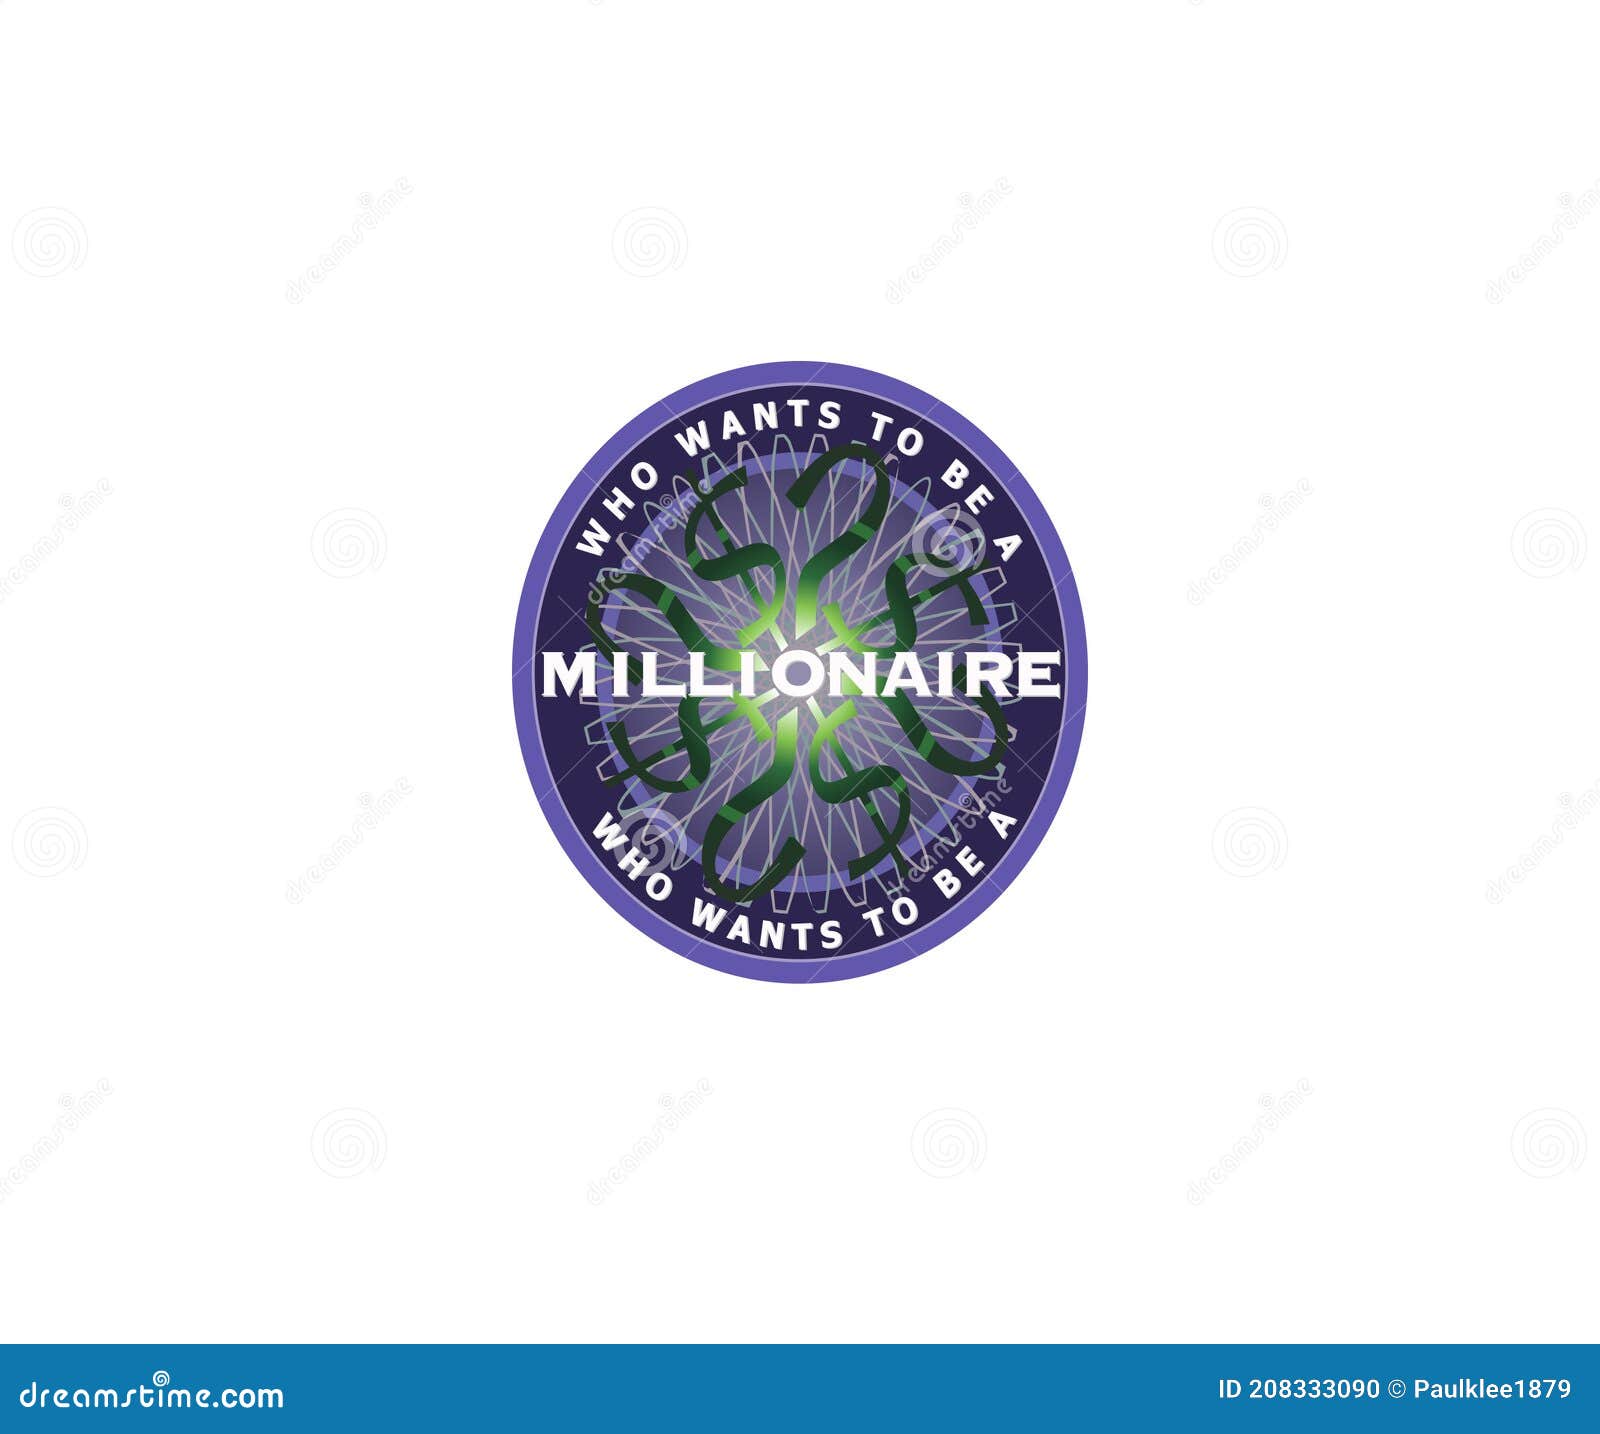 Download & Play Official Millionaire Game on PC & Mac (Emulator)